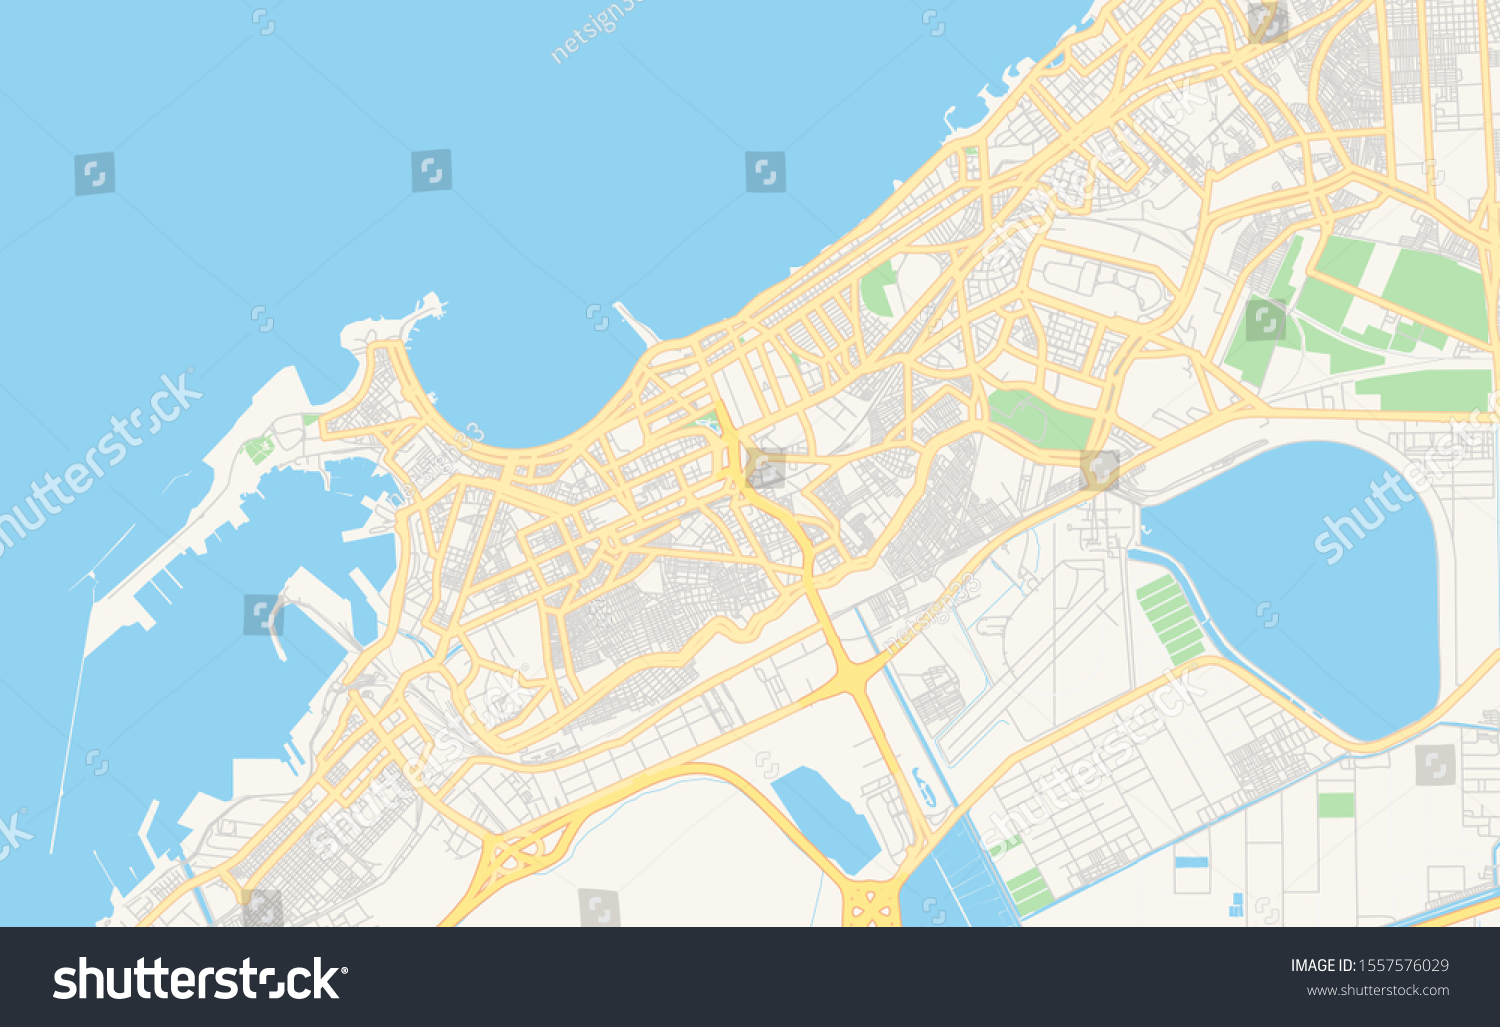 Stock Vector Printable Street Map Of Alexandria Egypt Map Template For Business Use 1557576029 